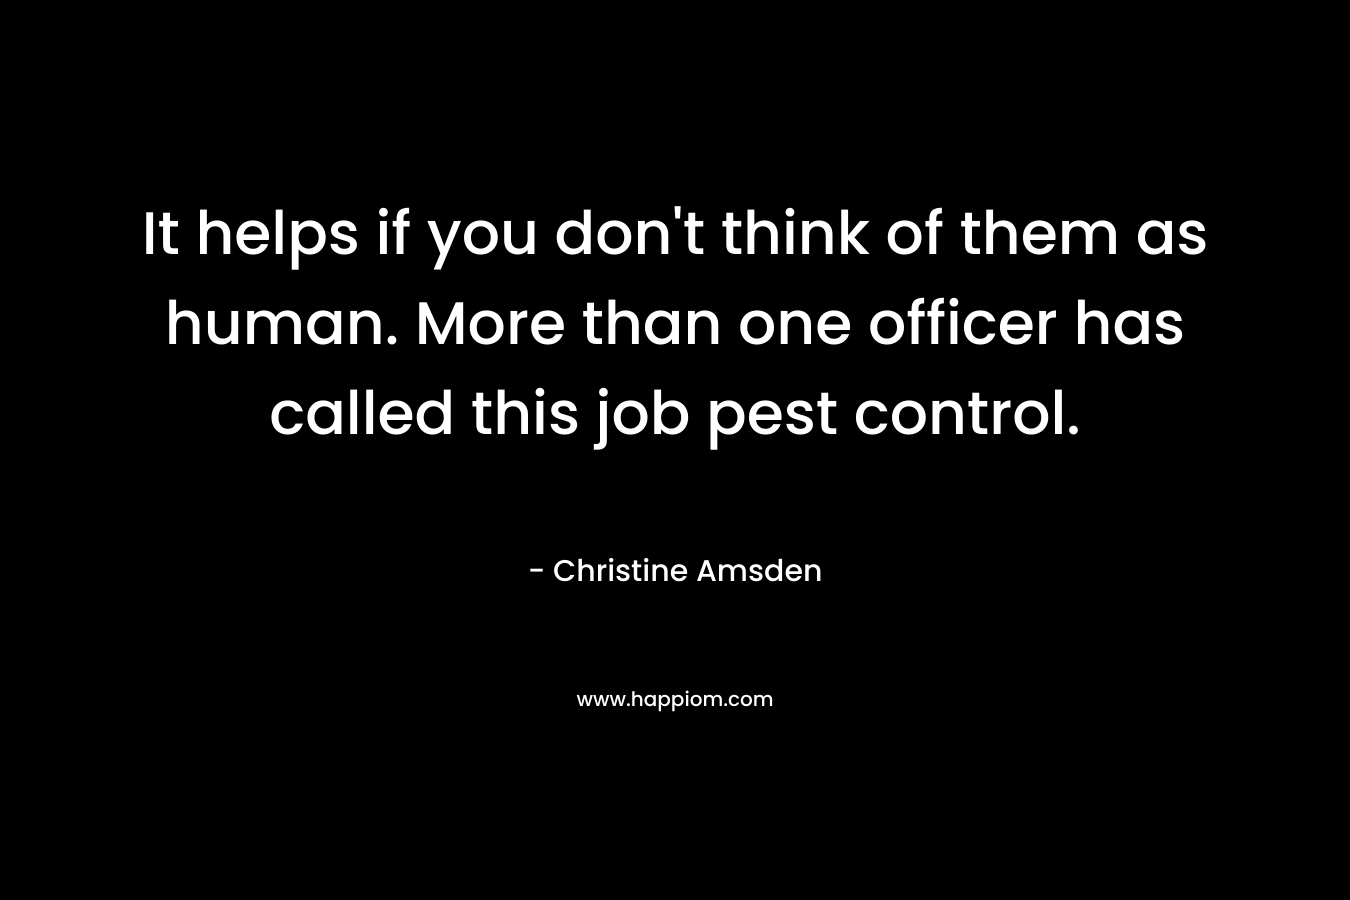 It helps if you don't think of them as human. More than one officer has called this job pest control.